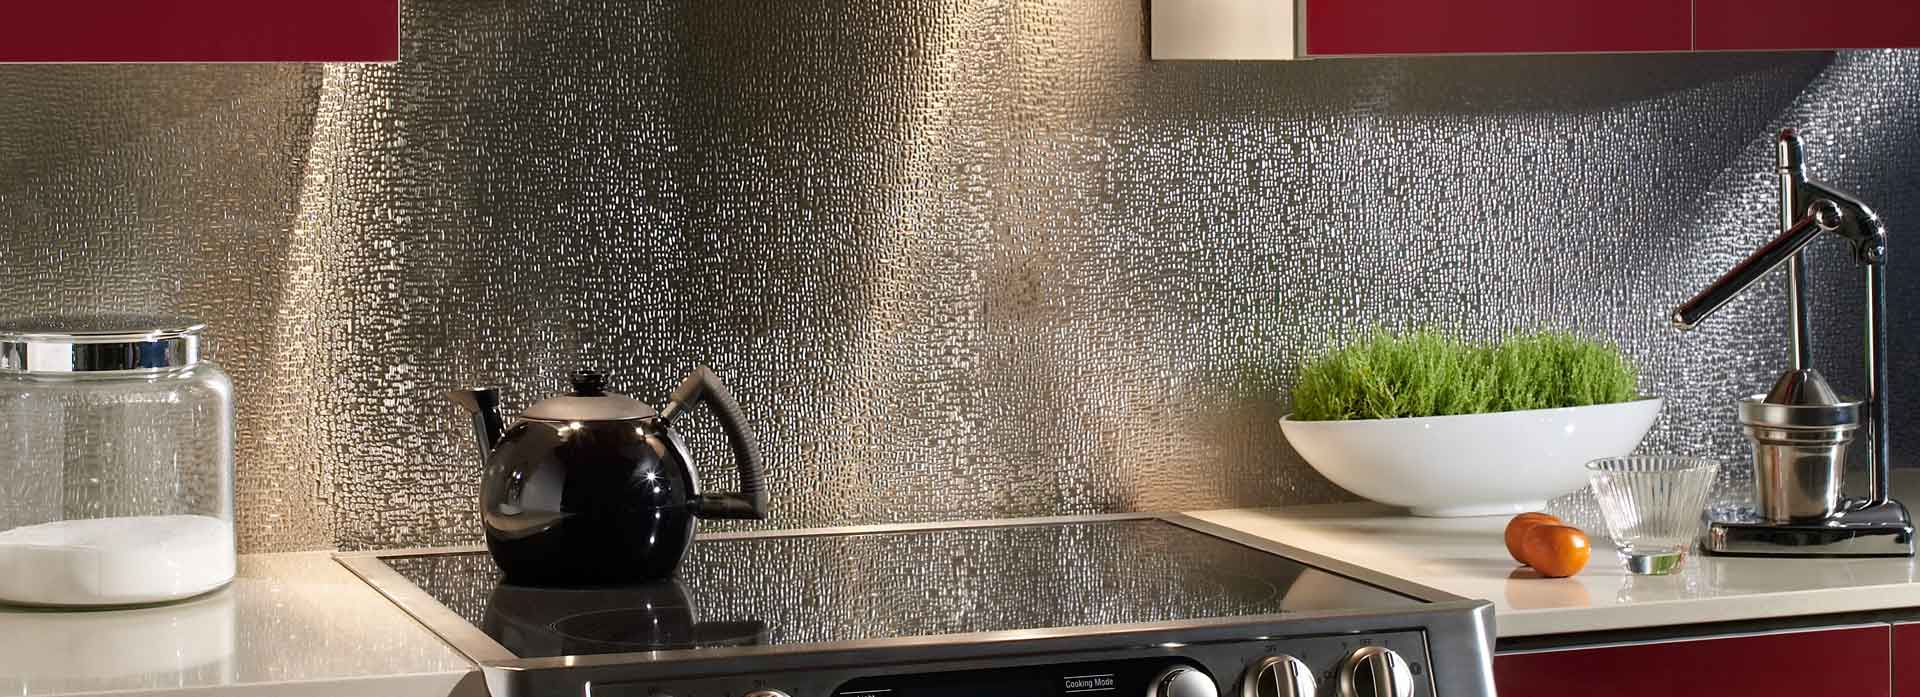 Using Stainless Steel For A Kitchen Backsplash When Remodeling